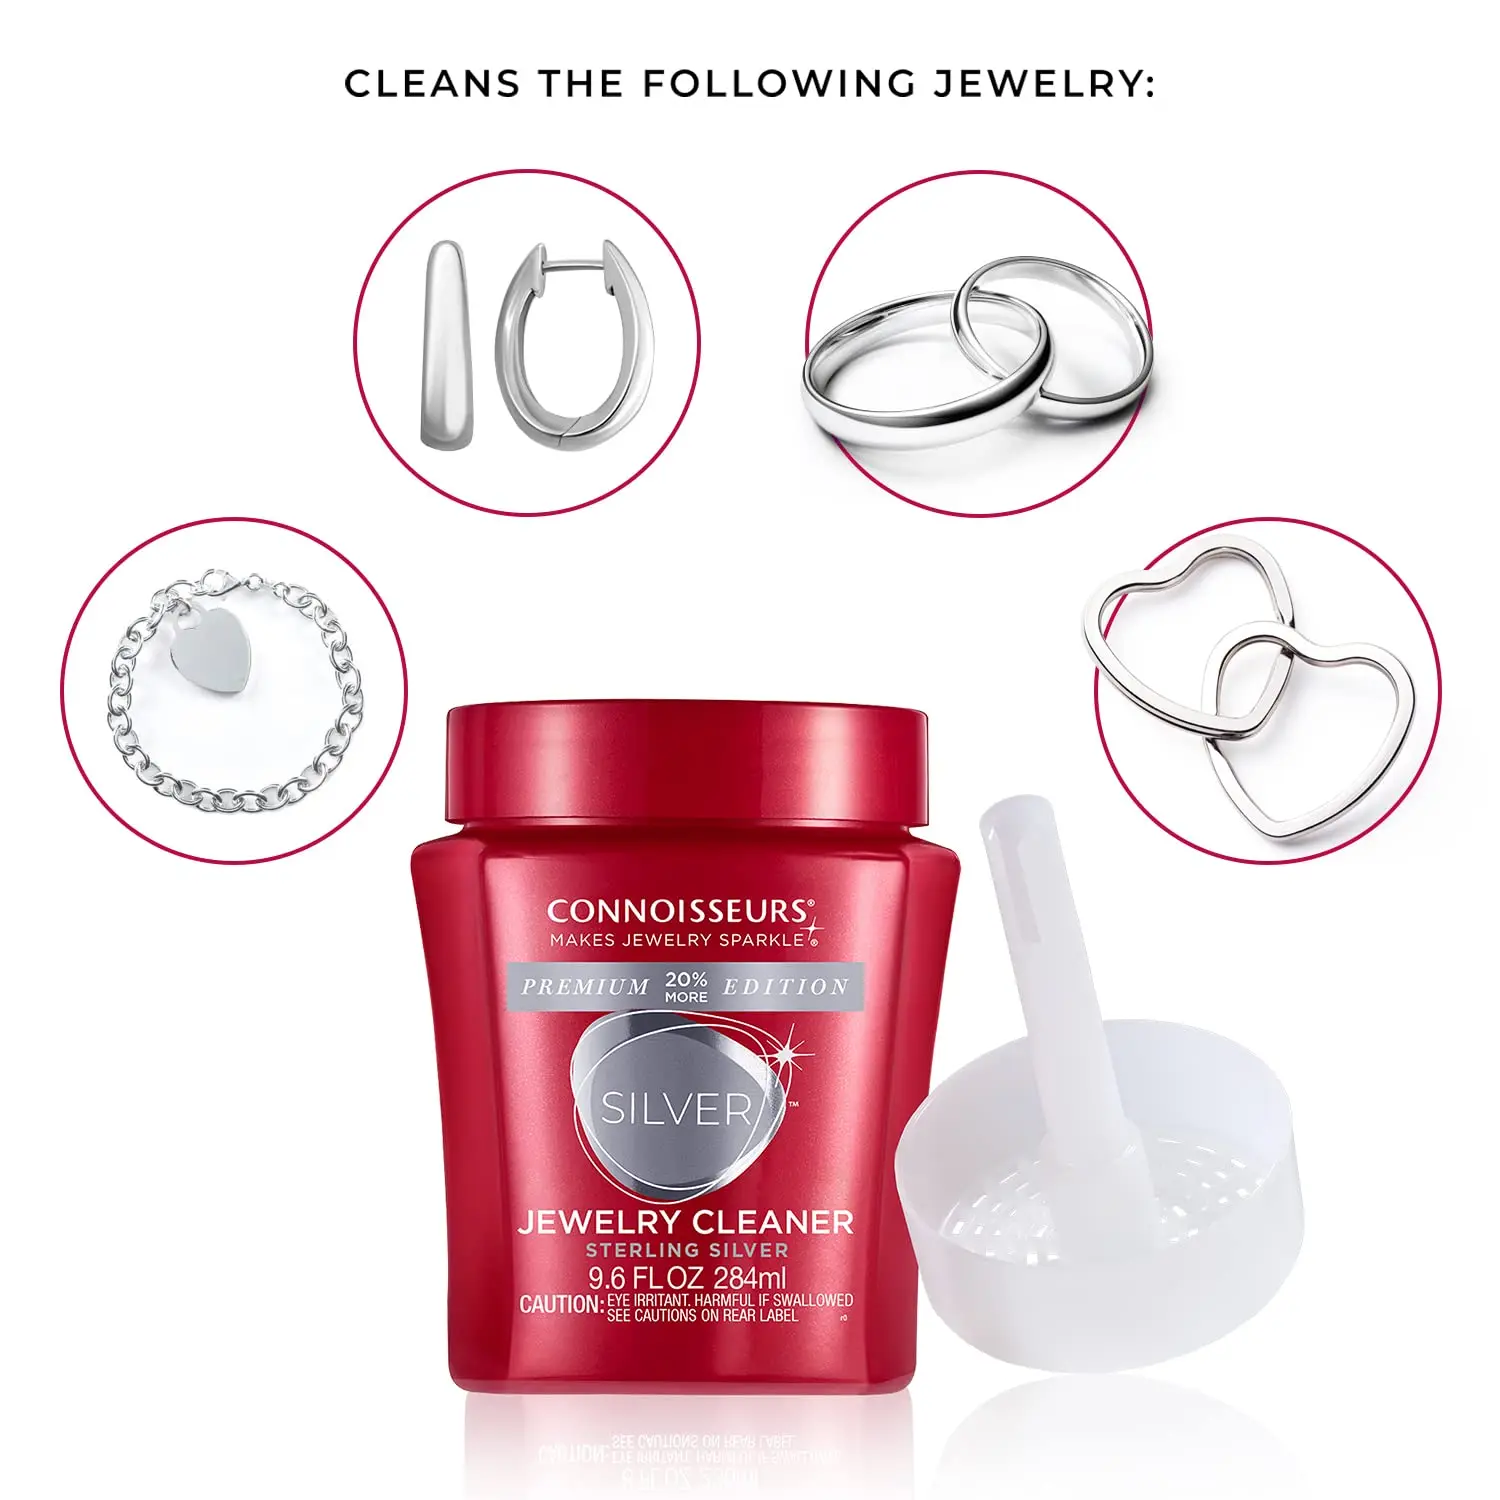 Connoisseurs Revitalizing Delicate Jewelry Cleaner & Silver